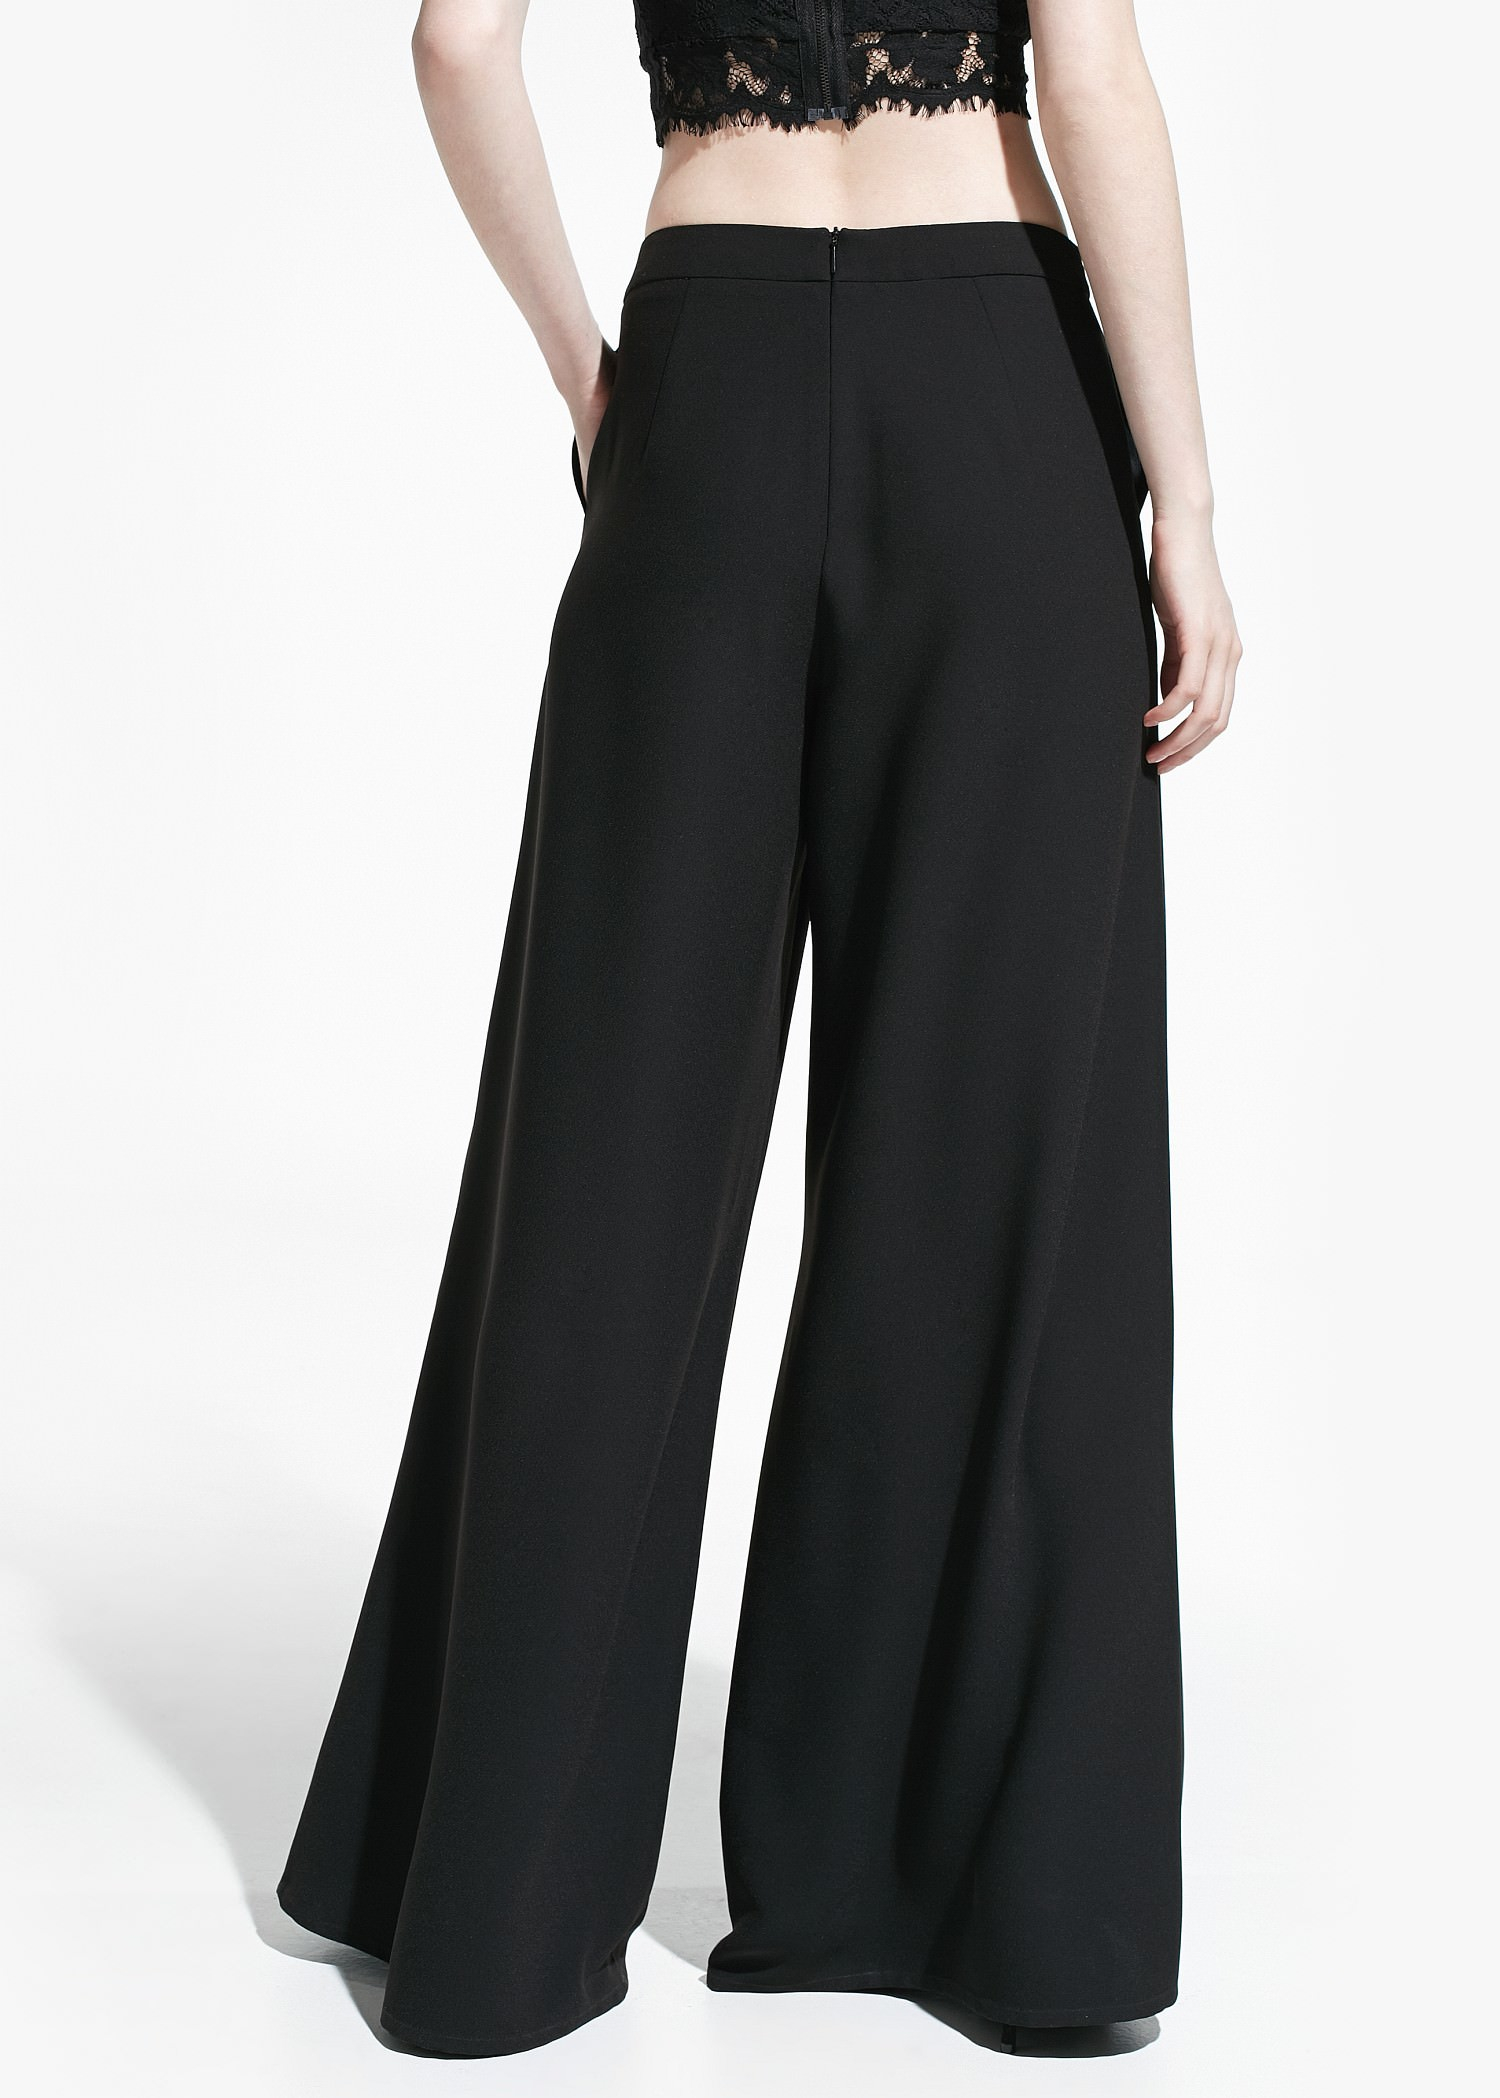 Lyst - Mango Palazzo Trousers in Black